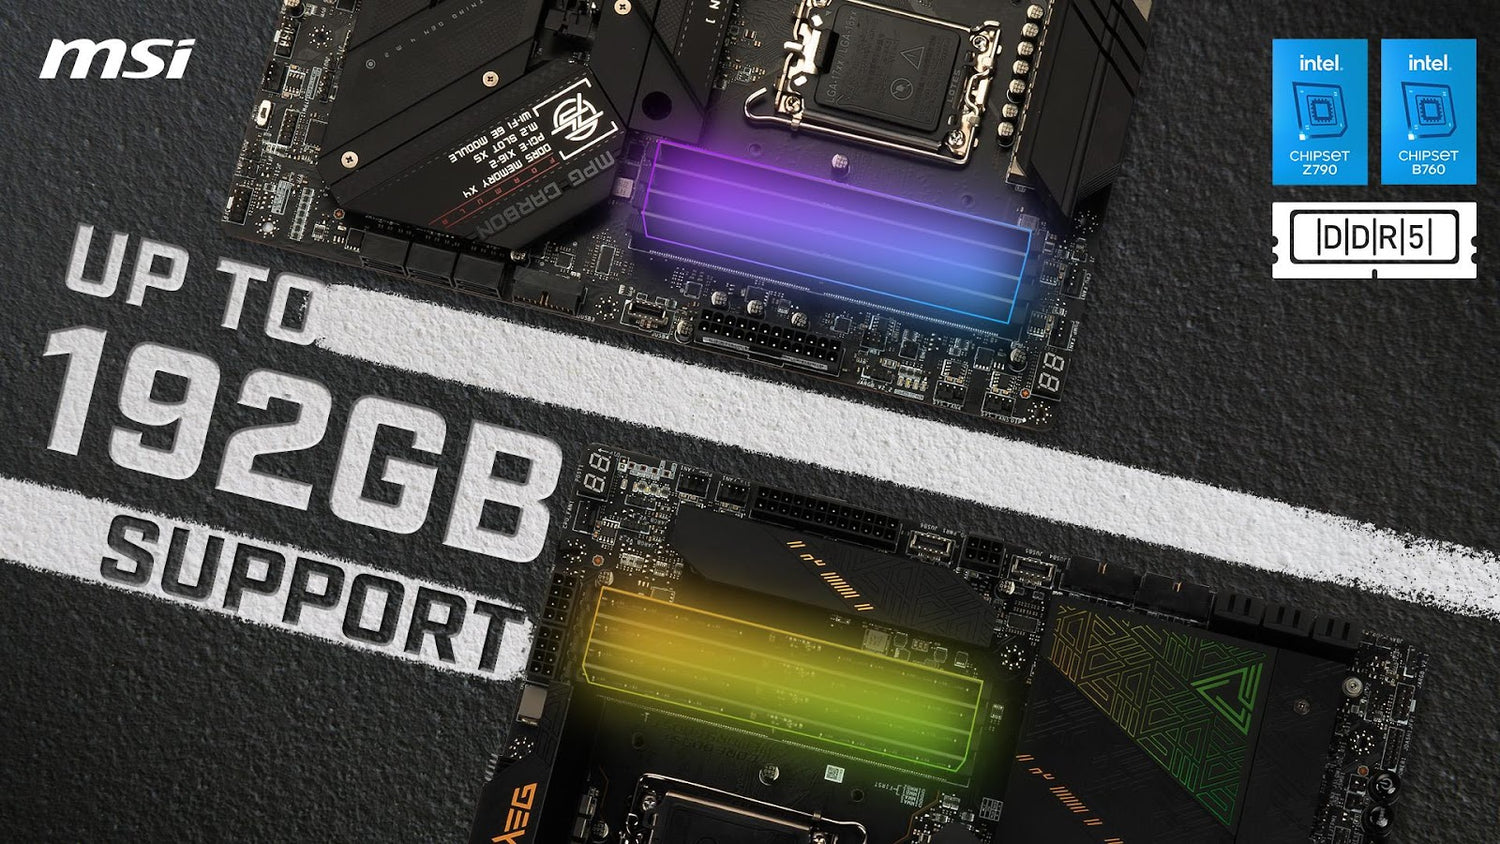 Release True Power! MSI Supports Memory Capacity Up To 192GB By Intel 700 Series Motherboards